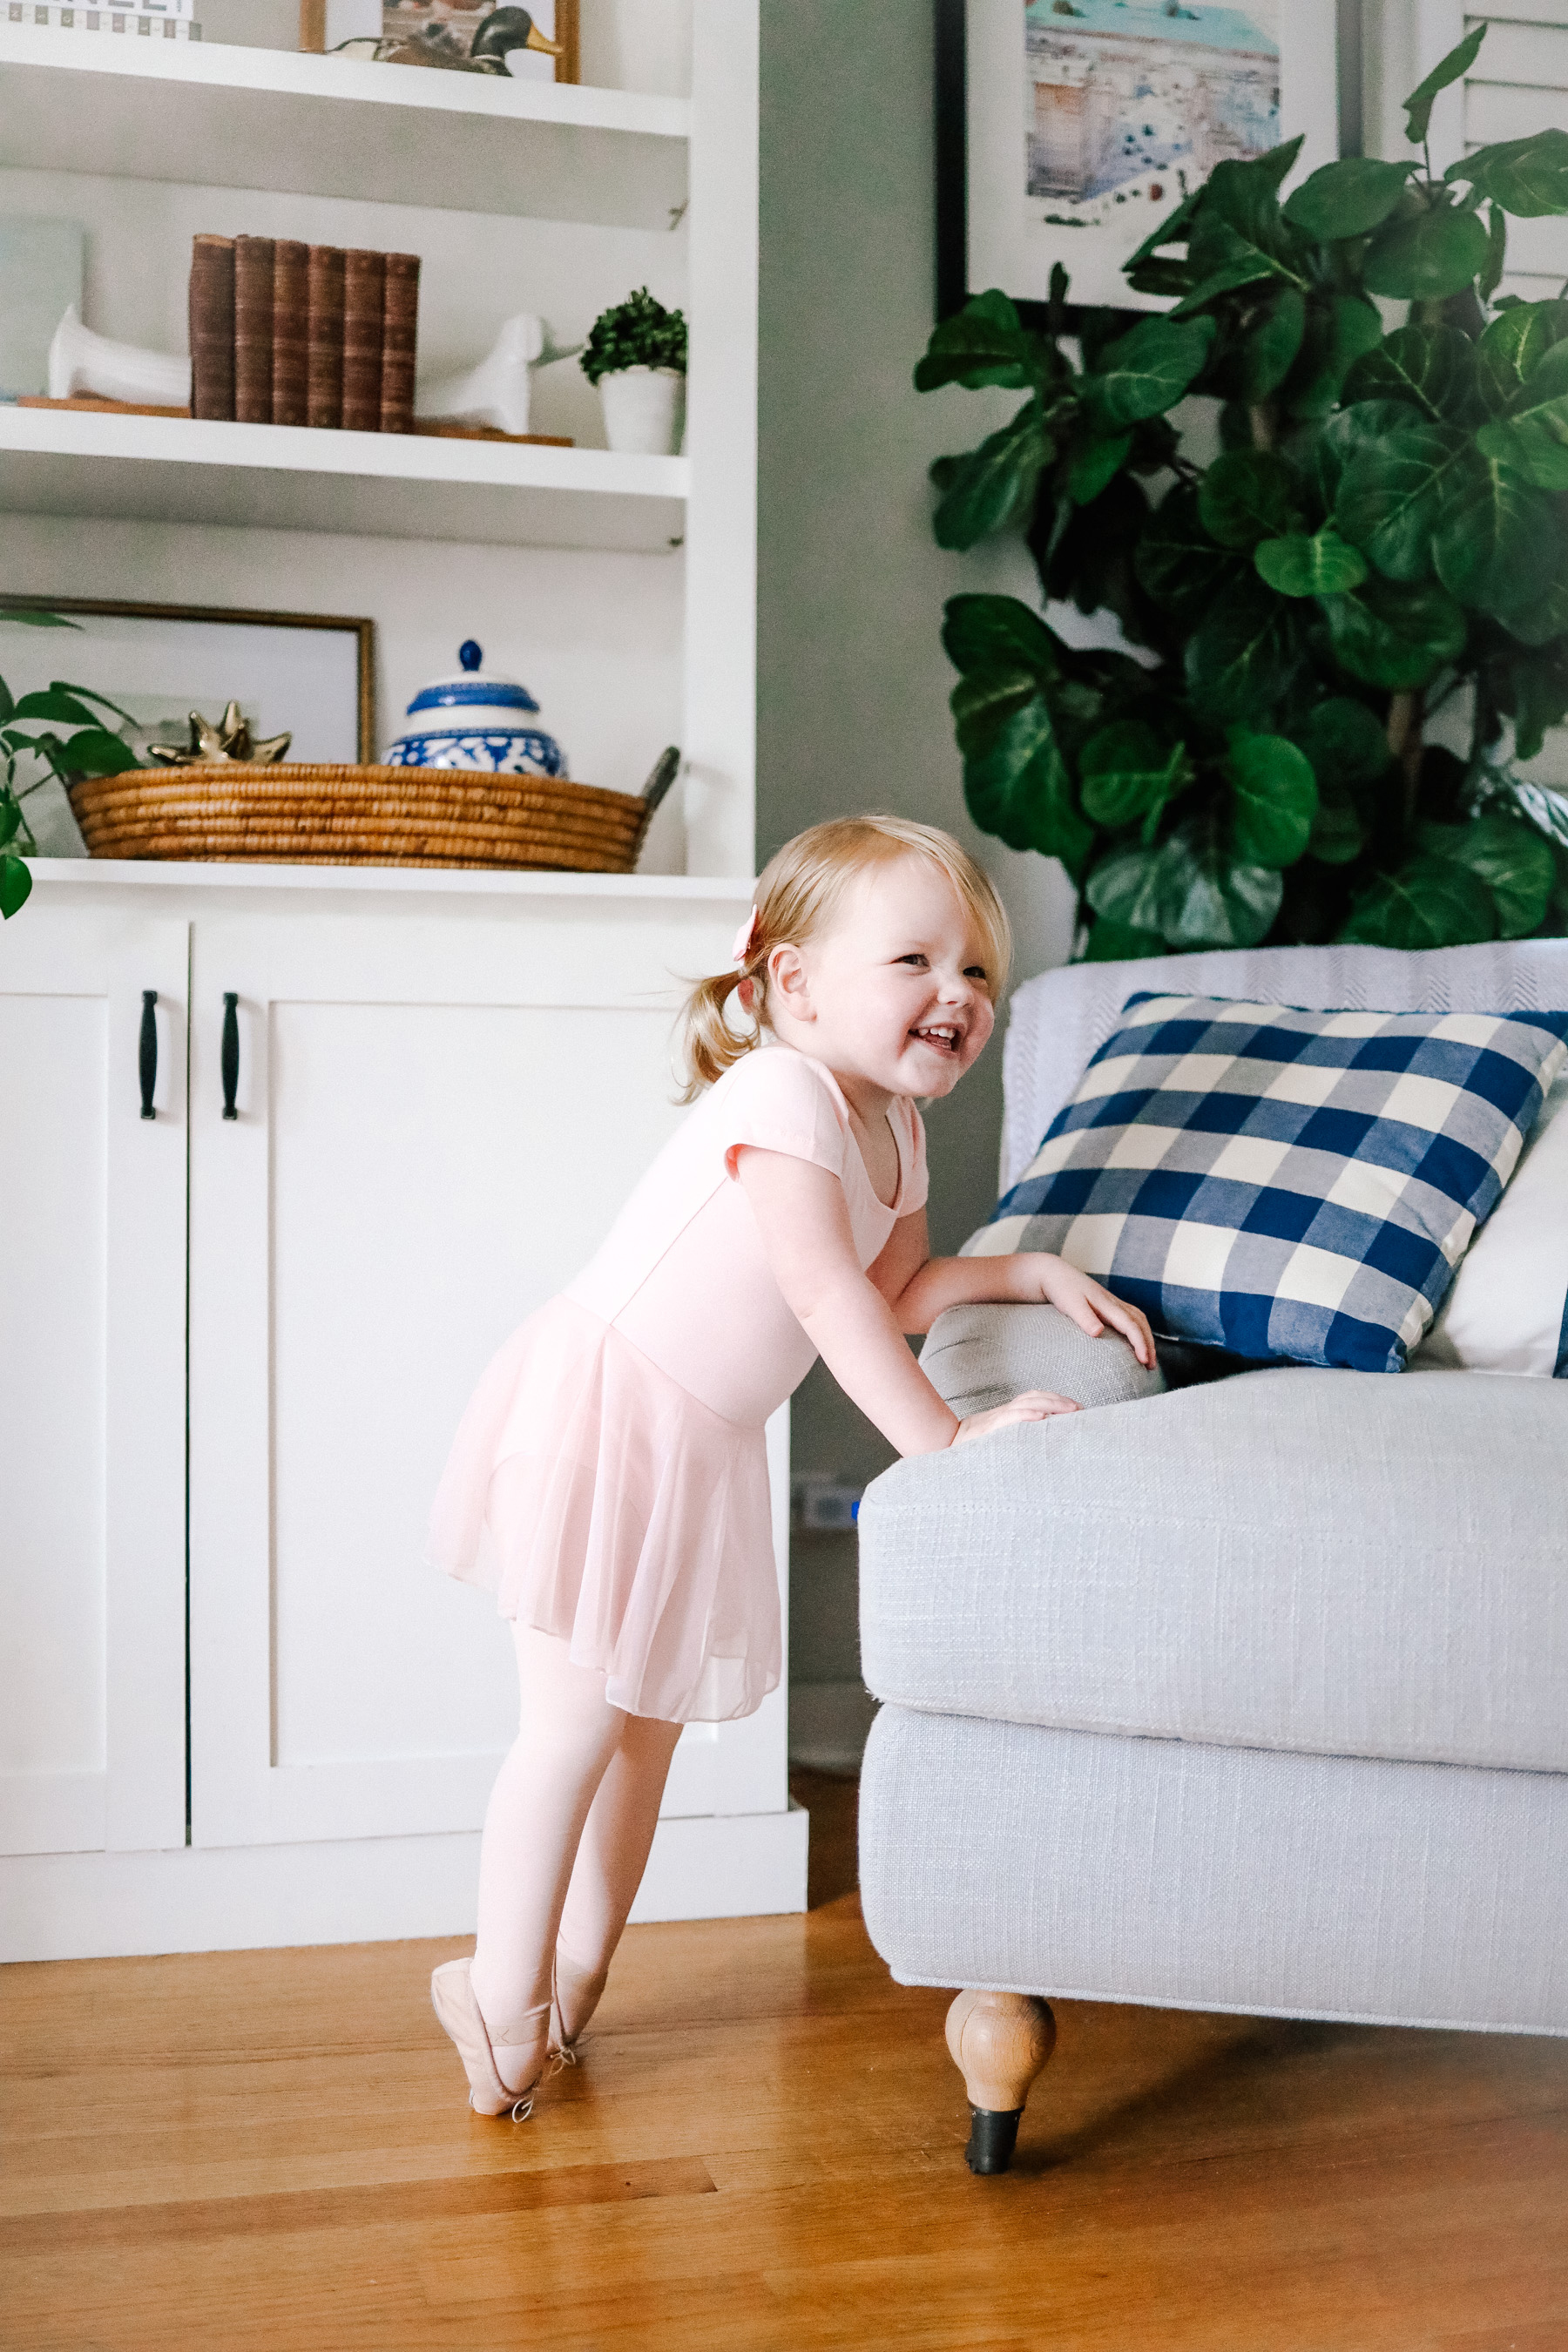 Emma is featuring a Toddler Ballerina Outfit | Kelly in the City